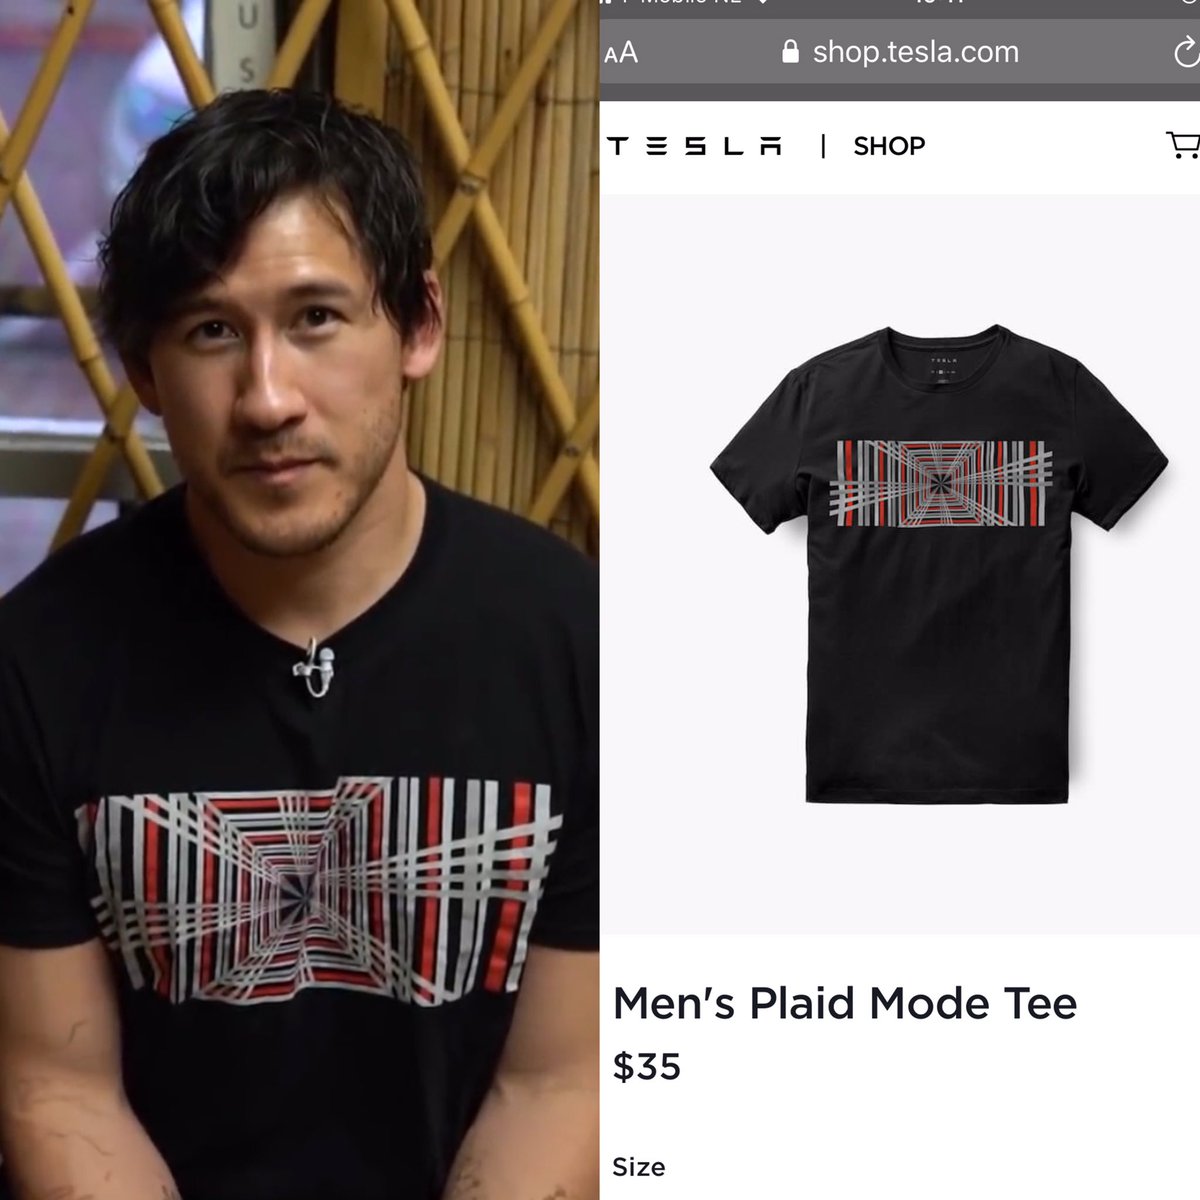 Moving on with this shirt!! OFCOURSE Mark has a Tesla shirt. This one is still available too and it’s not too expensive! I like the design on this one. Get the tee here:  https://shop.tesla.com/product/men_s-plaid-mode-tee?sku=1549268-00-A